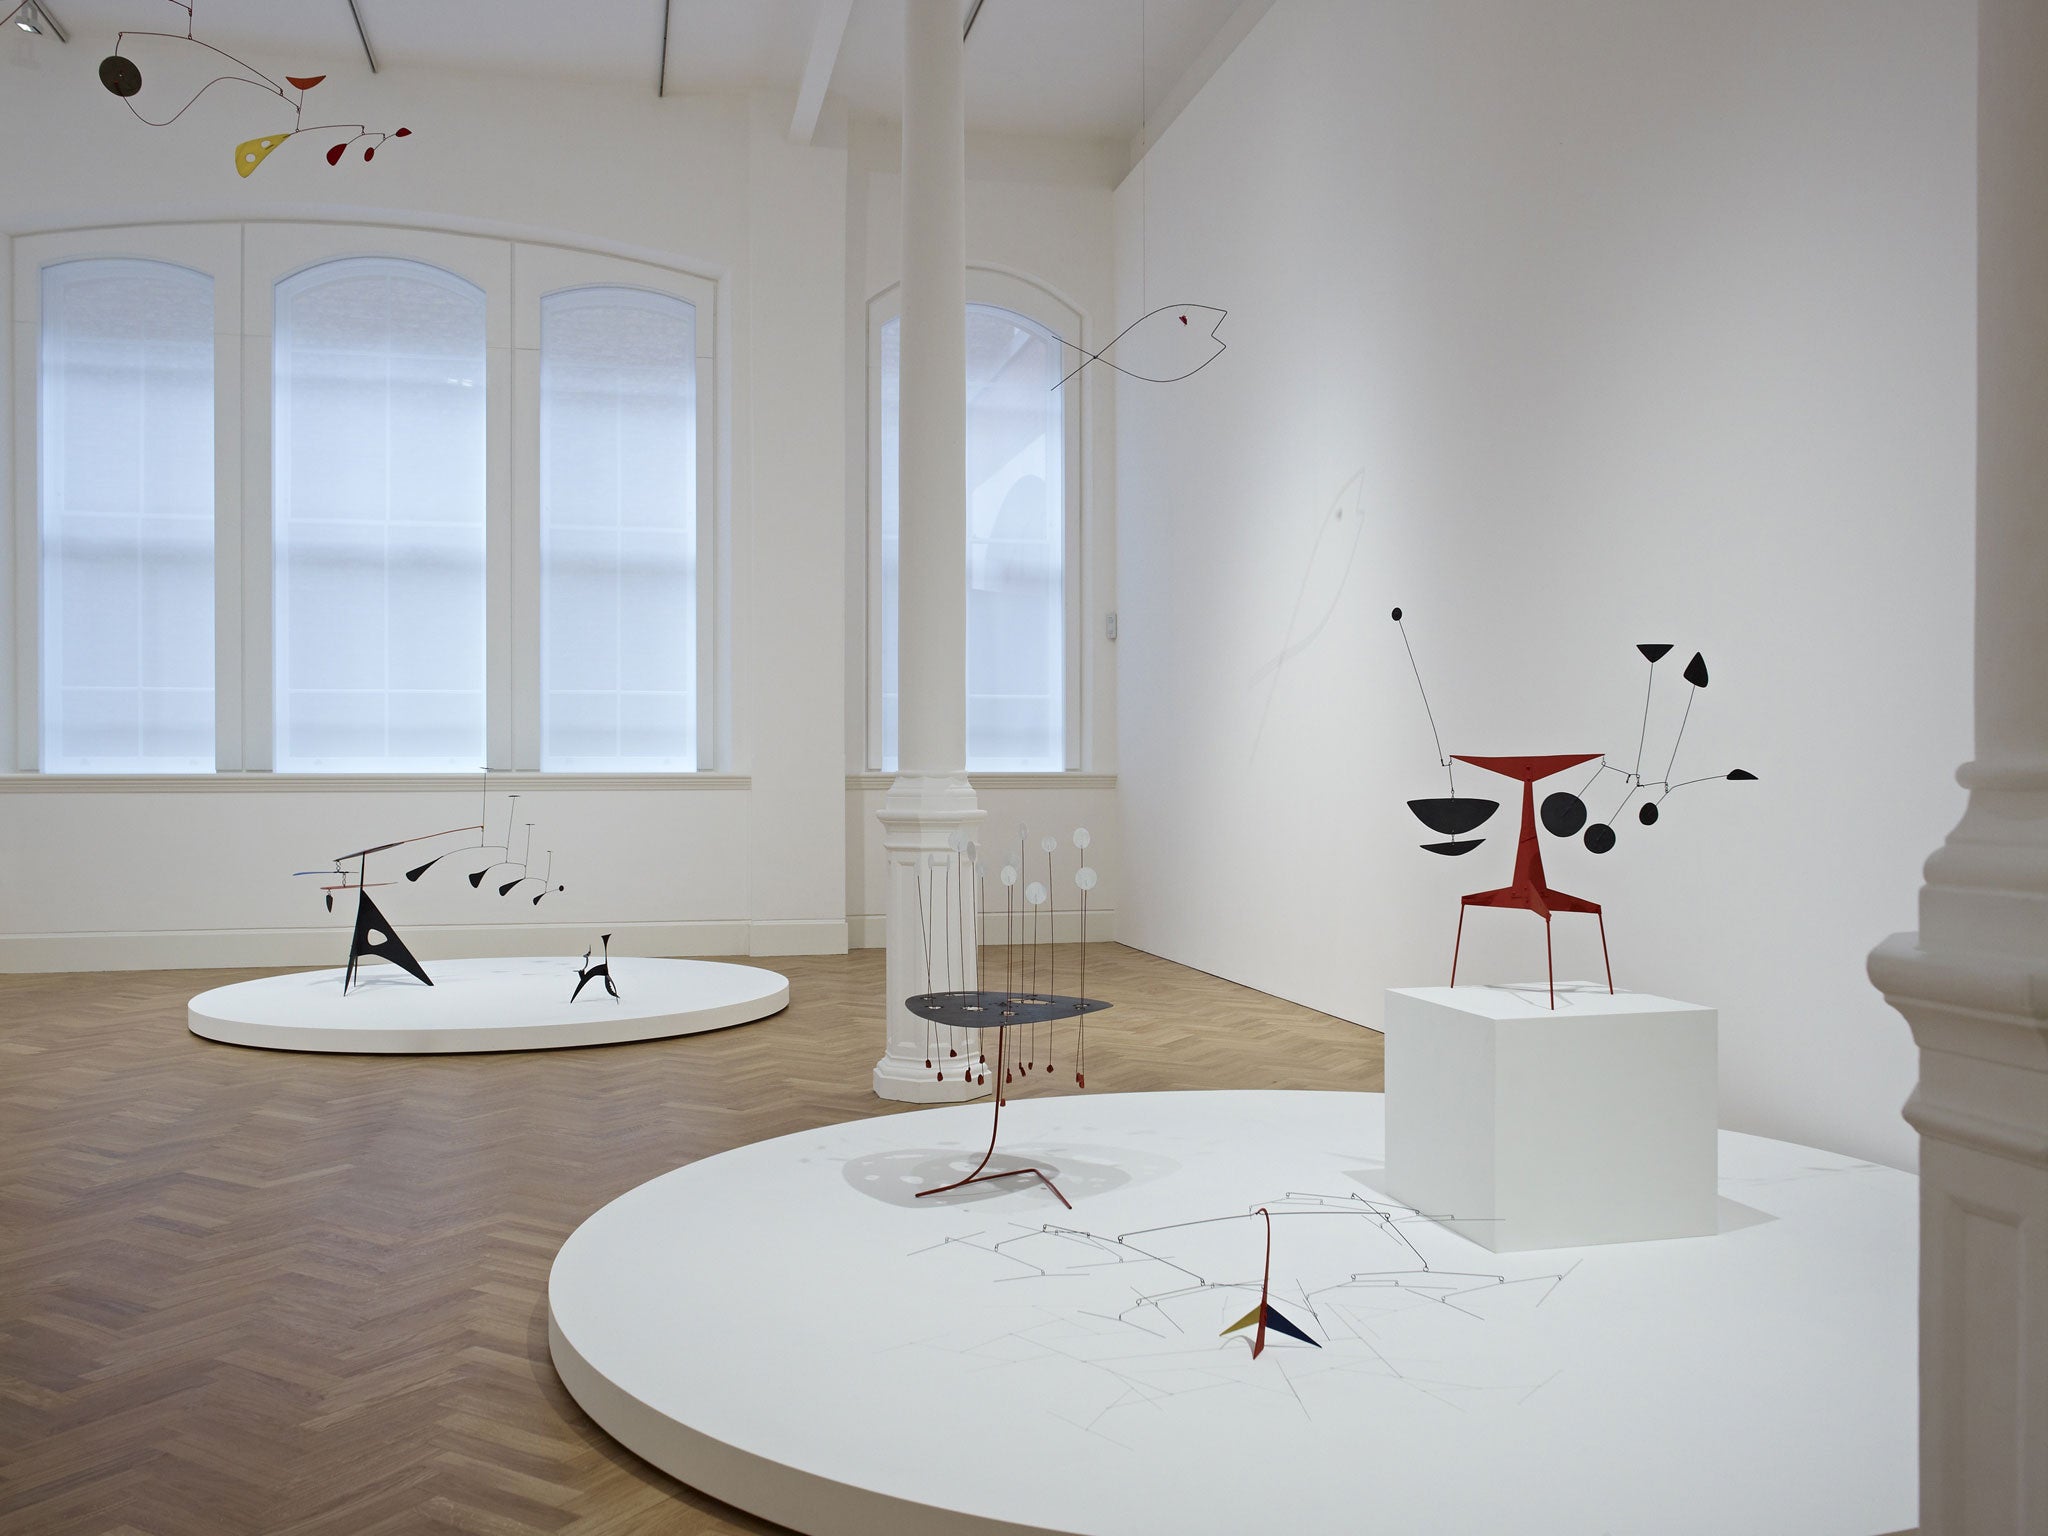 On the move: Calder’s mobiles have slender elements but suggest a bigger space